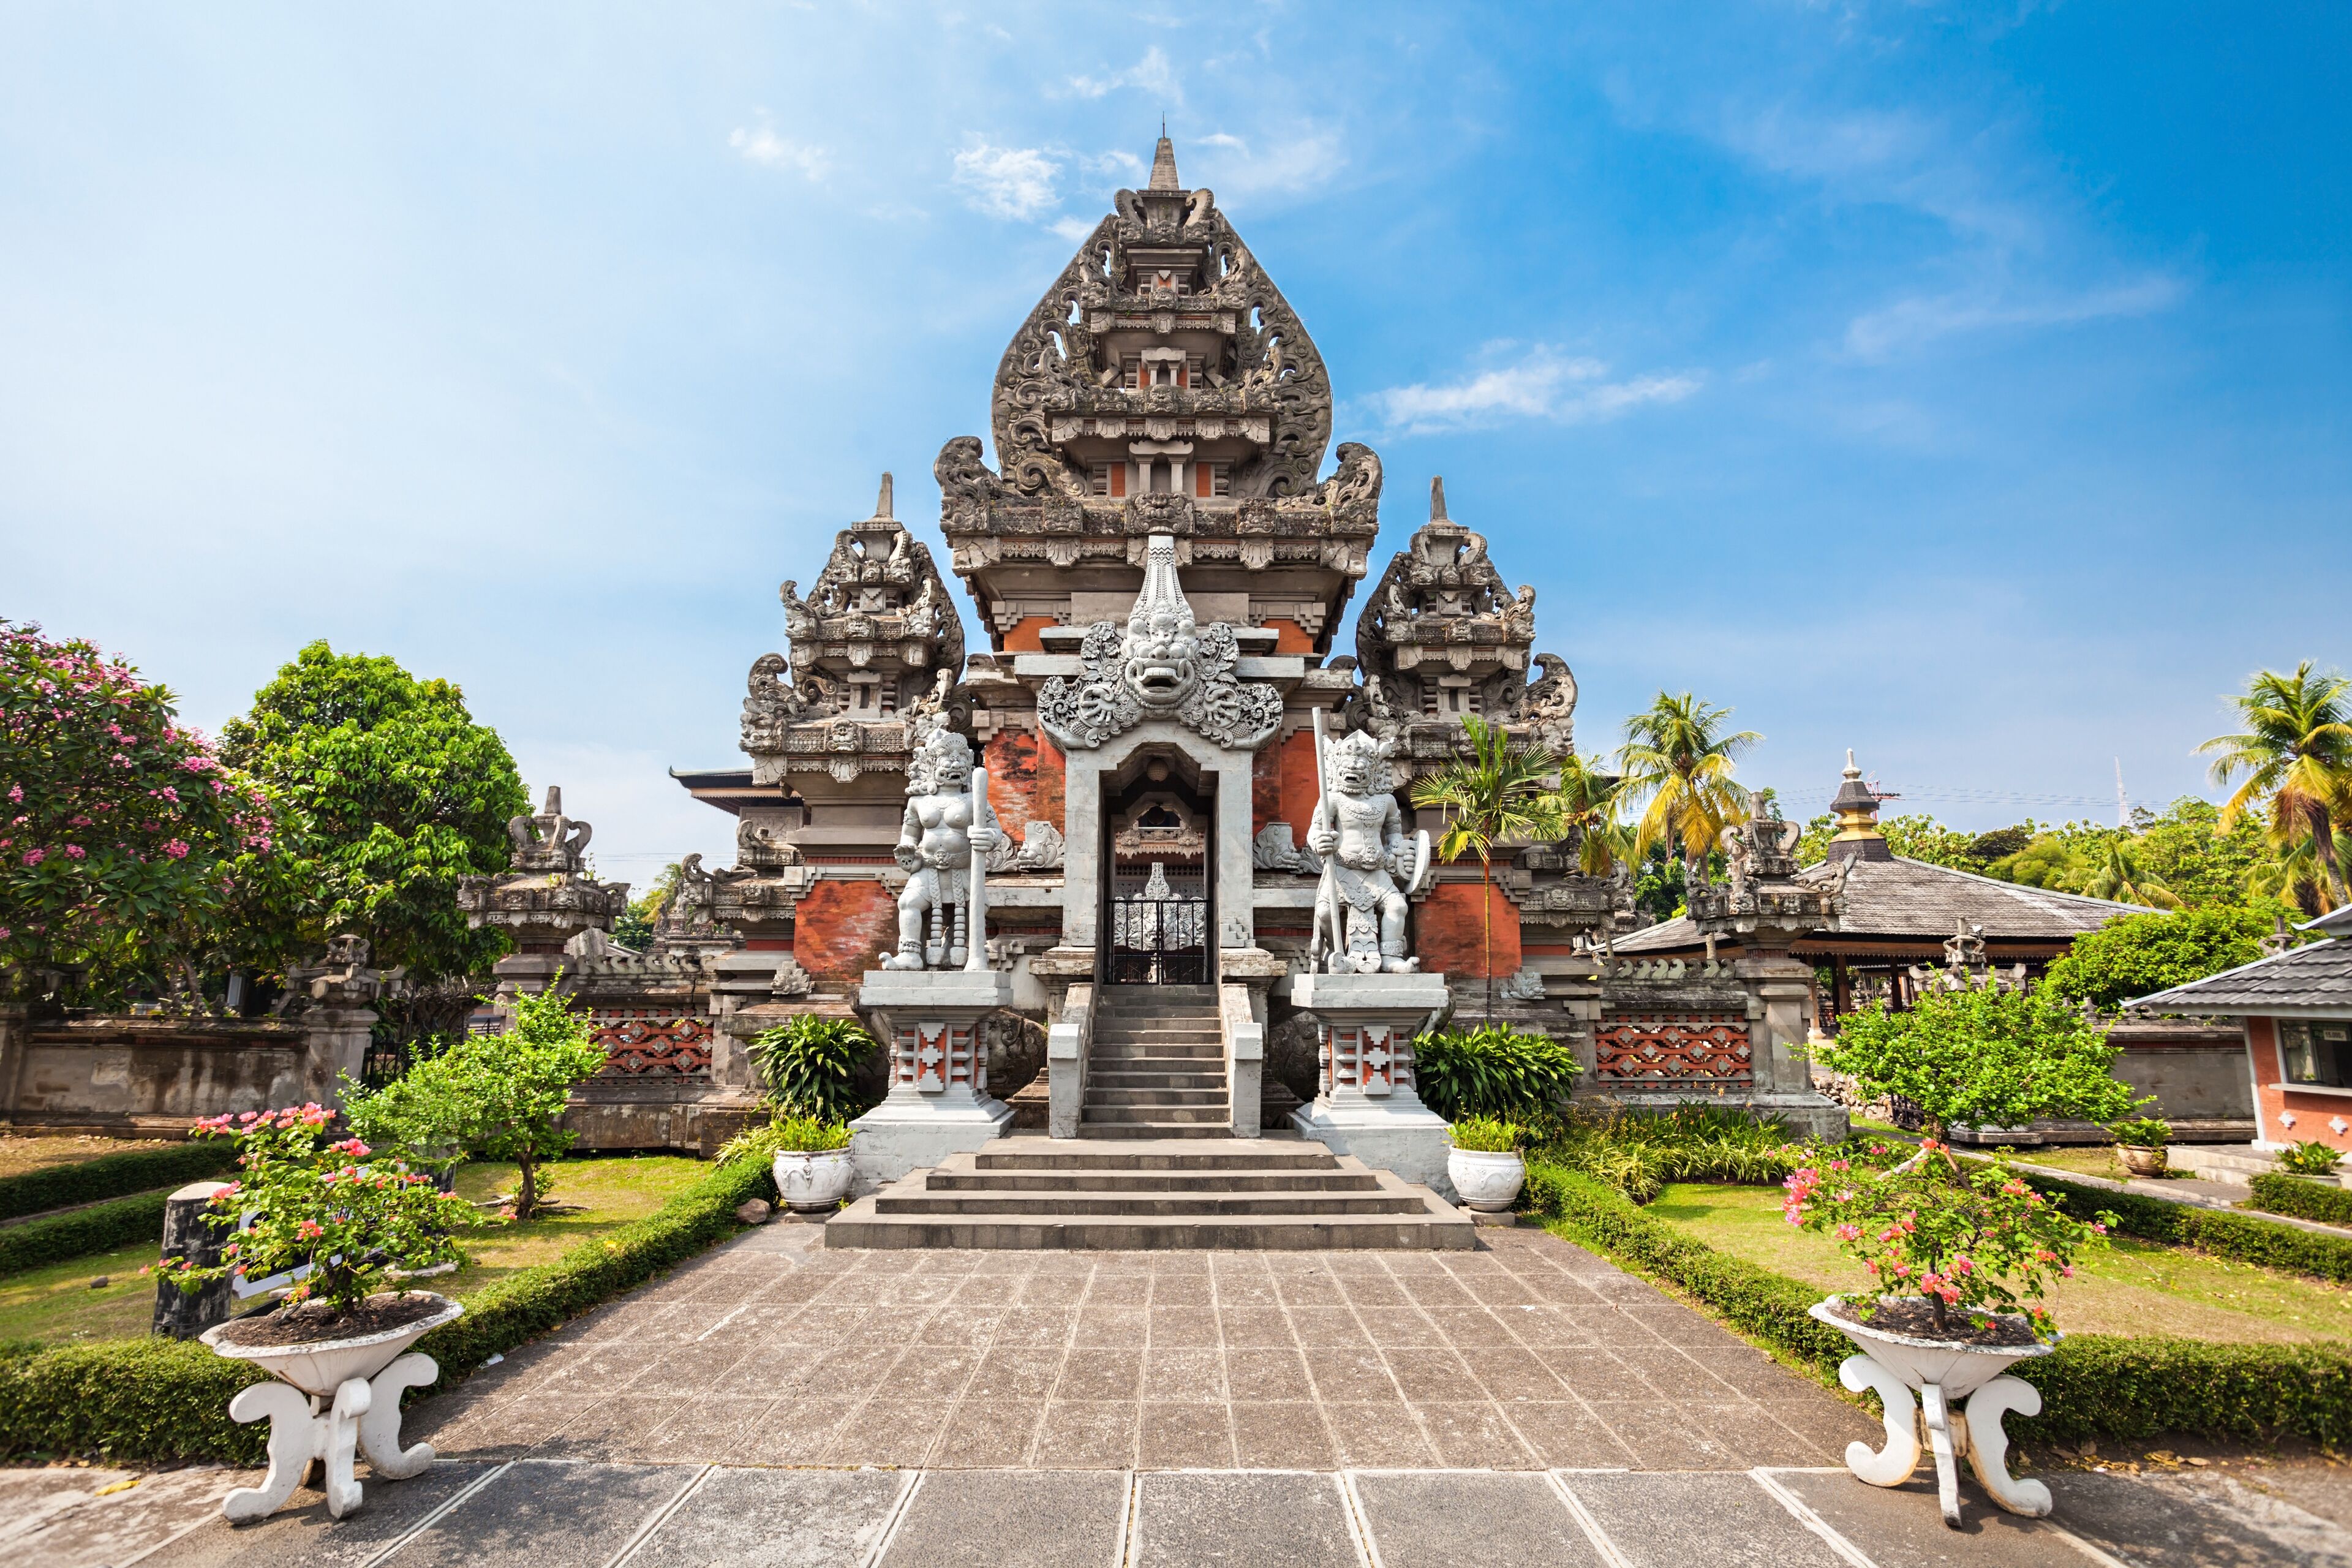 The entrance to a Balinese temple, featuring intricate stone carvings, guardian statues, and tropical foliage under a clear sky.